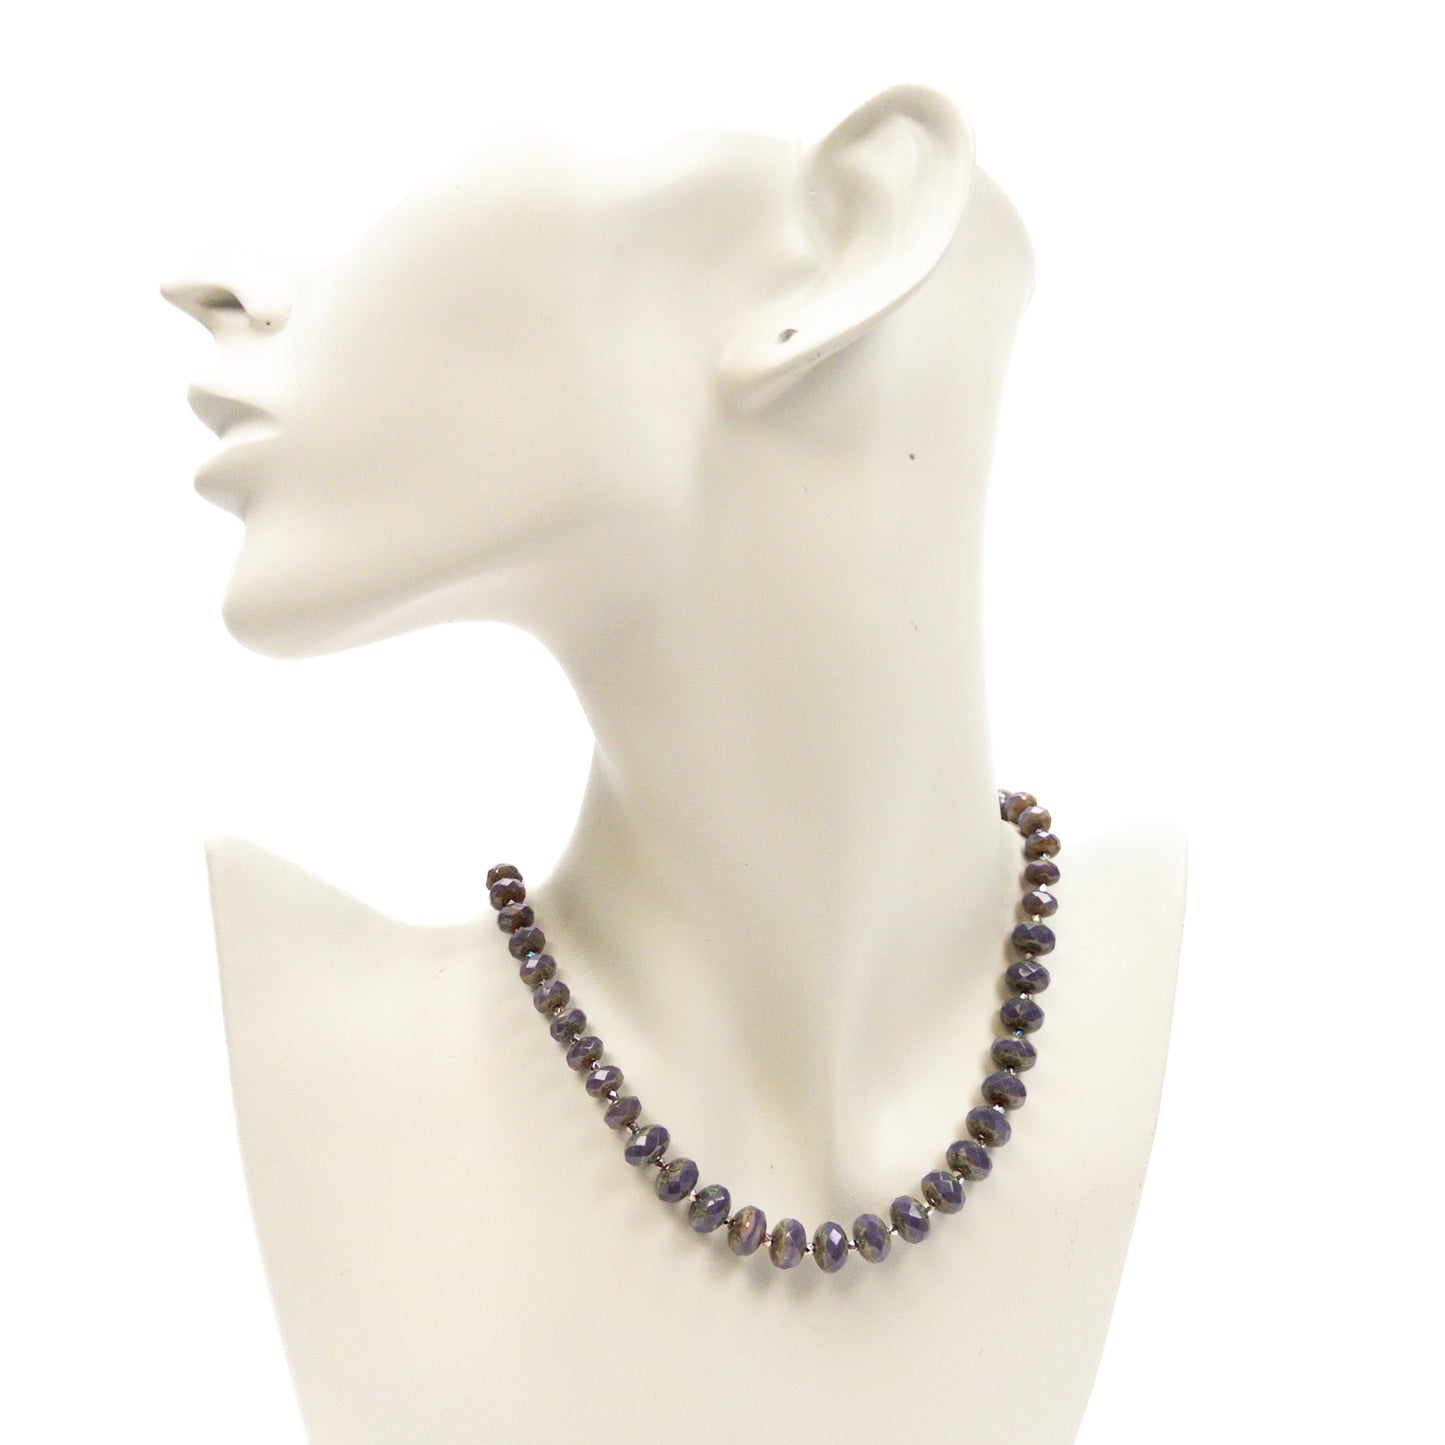 **NEEDS PRICING** Czech Glass Graduated Necklace Kit (3 Color Options) - 1 kit-The Bead Gallery Honolulu